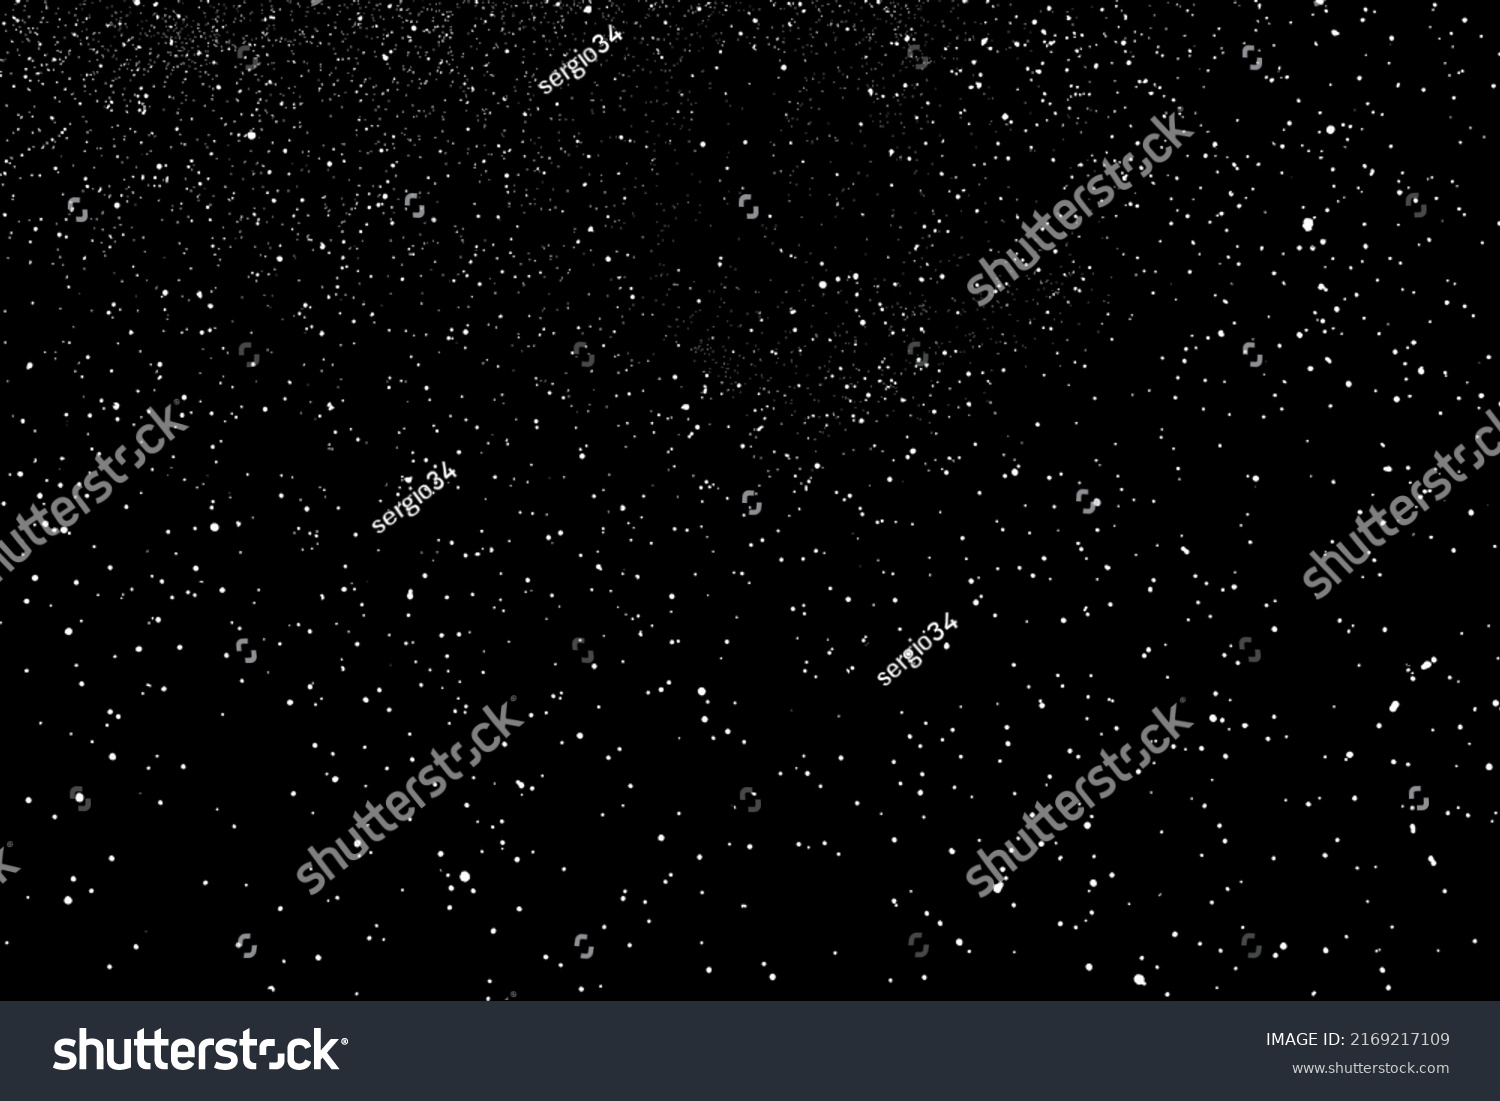 Distressed white grainy texture. Dust overlay textured. Grain noise particles. Snow effects pack. Rusted black background. Vector illustration, EPS 10.   #2169217109